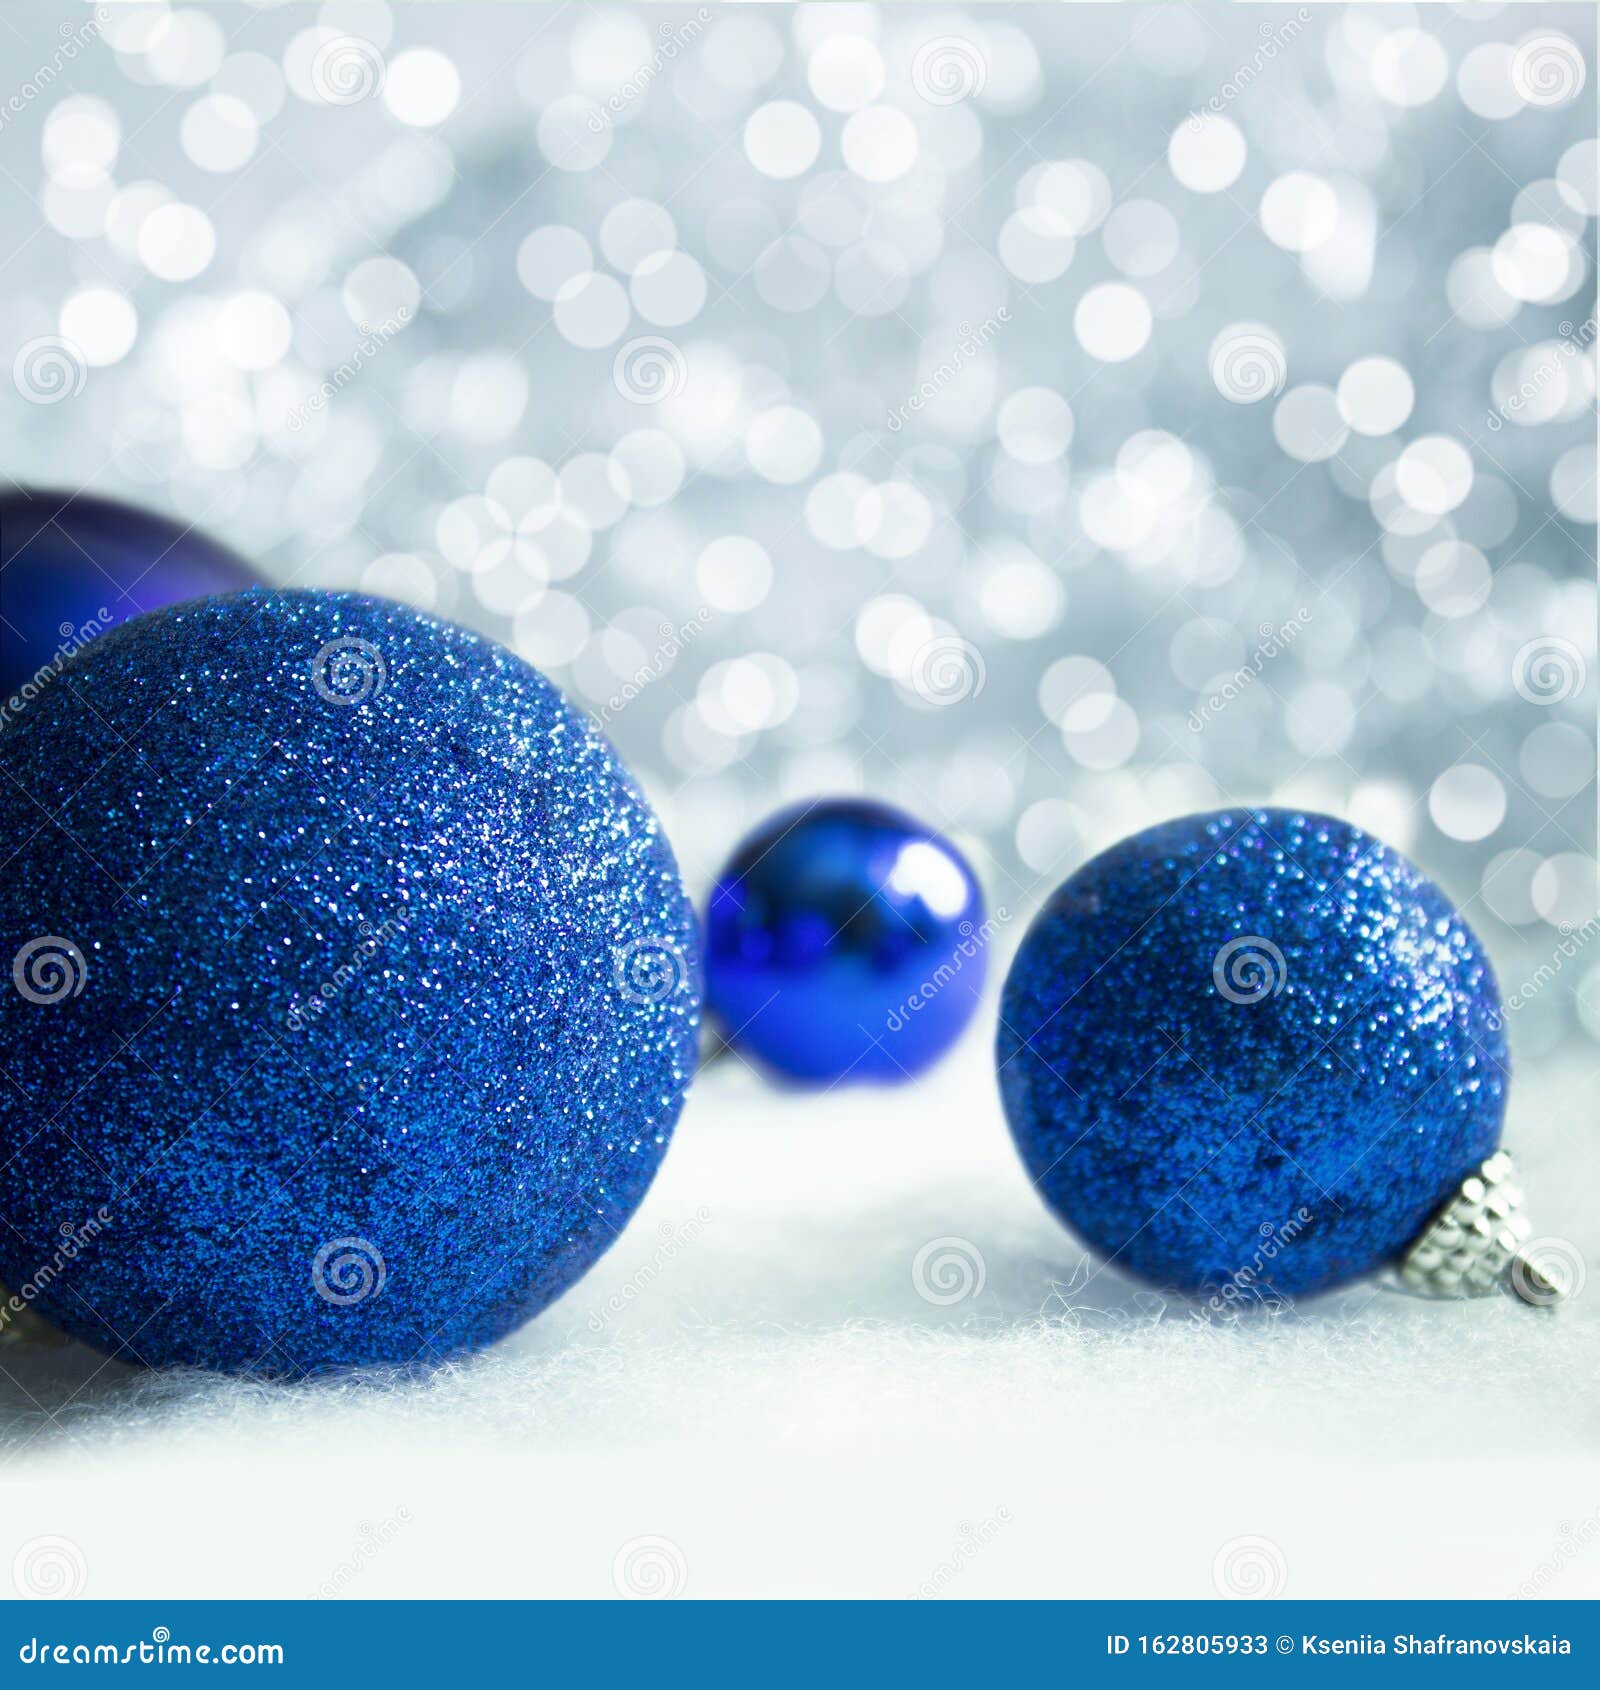 Christmas Blue Decorations on Snow Background Stock Image - Image of ...